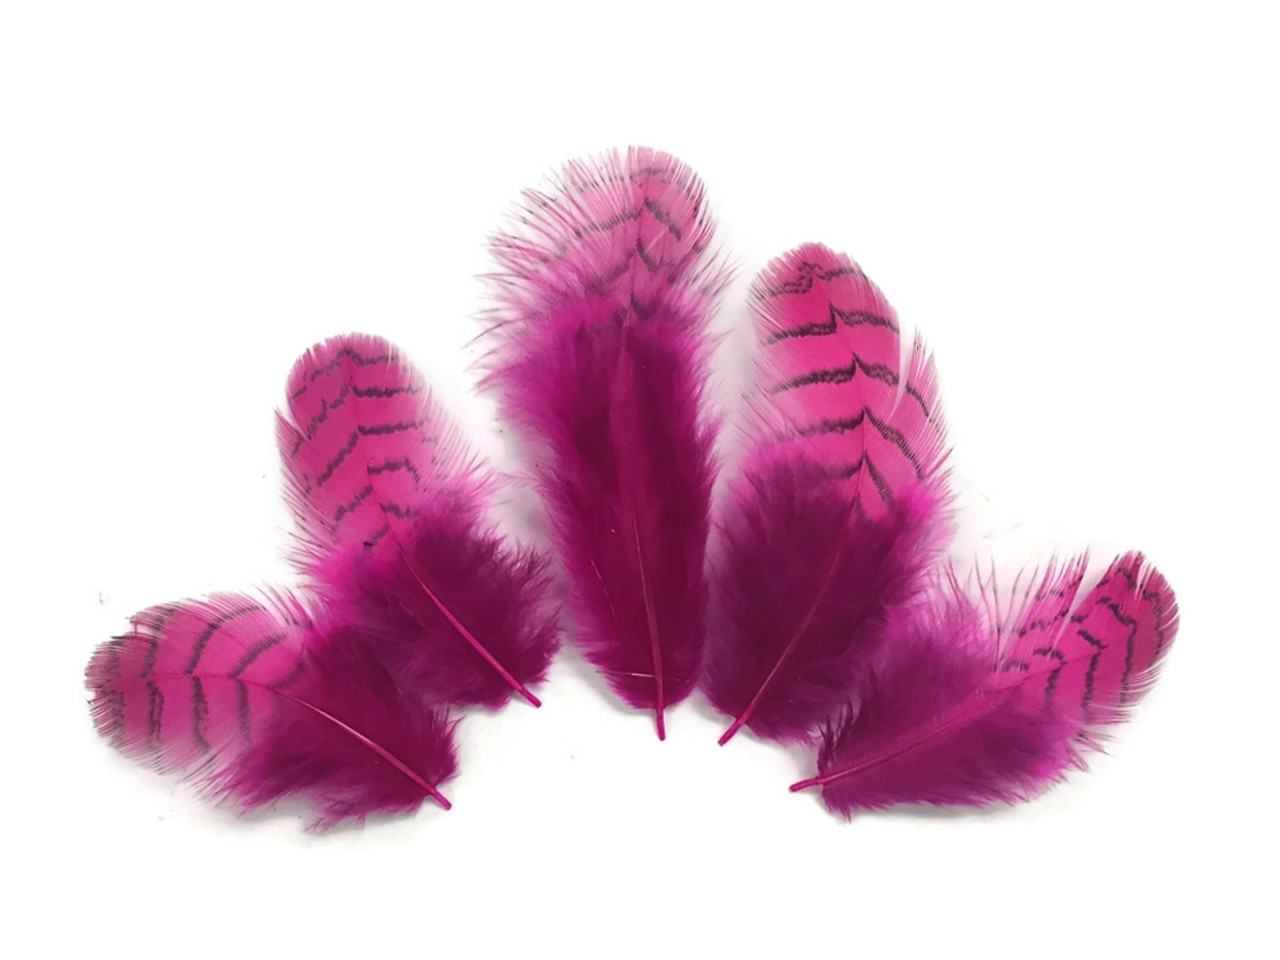 10 Pieces - Hot Pink Dyed Gray Partridge Small Plumage Feathers